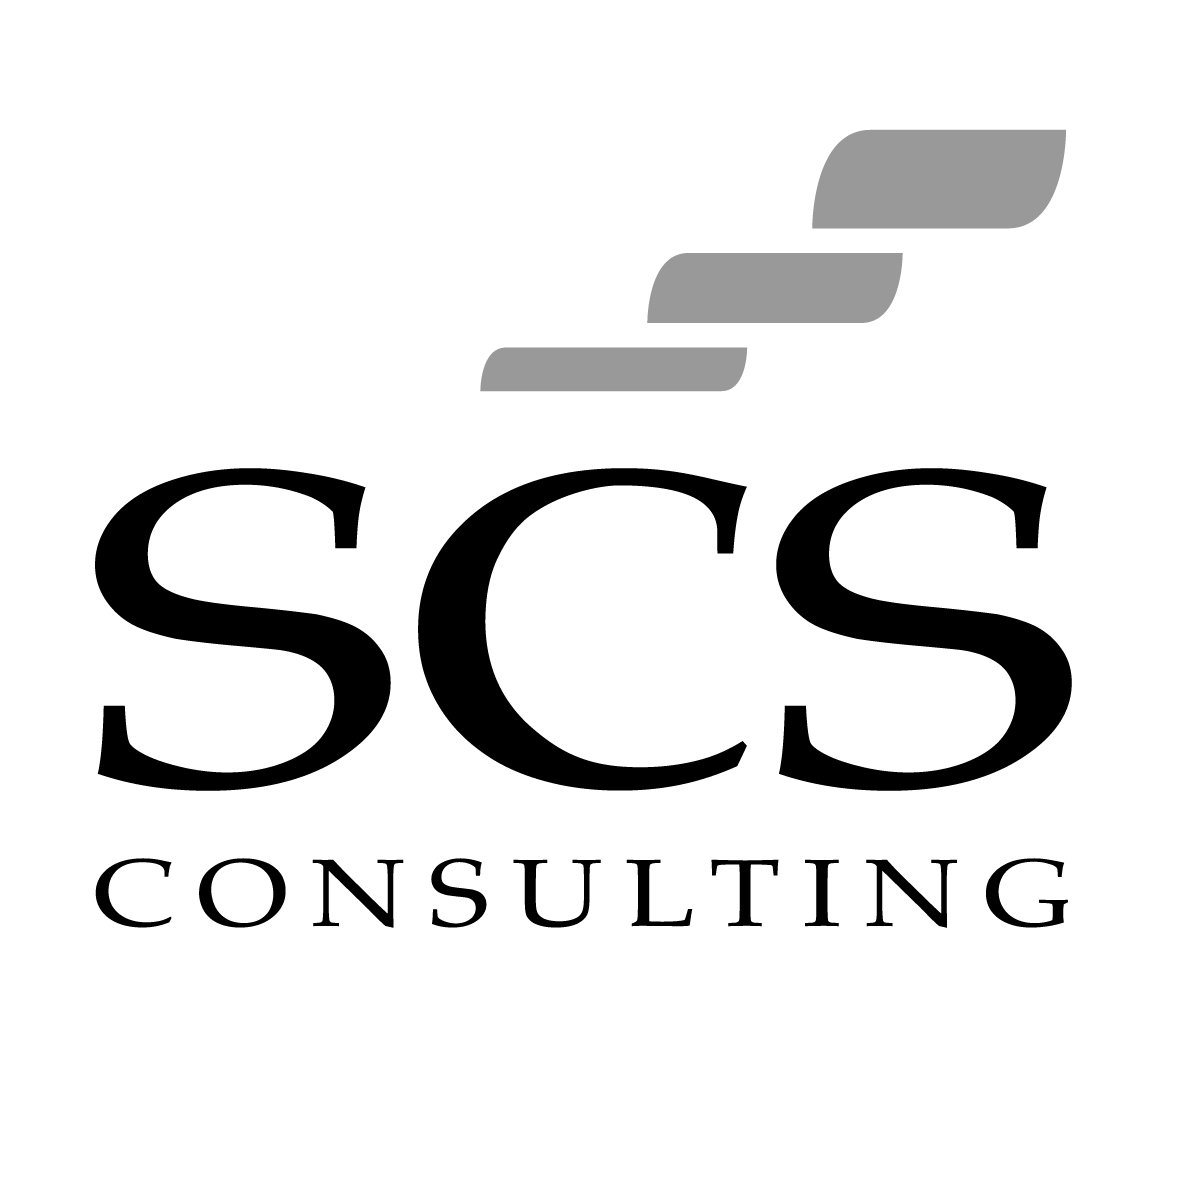 http://www.scsconsulting.it/